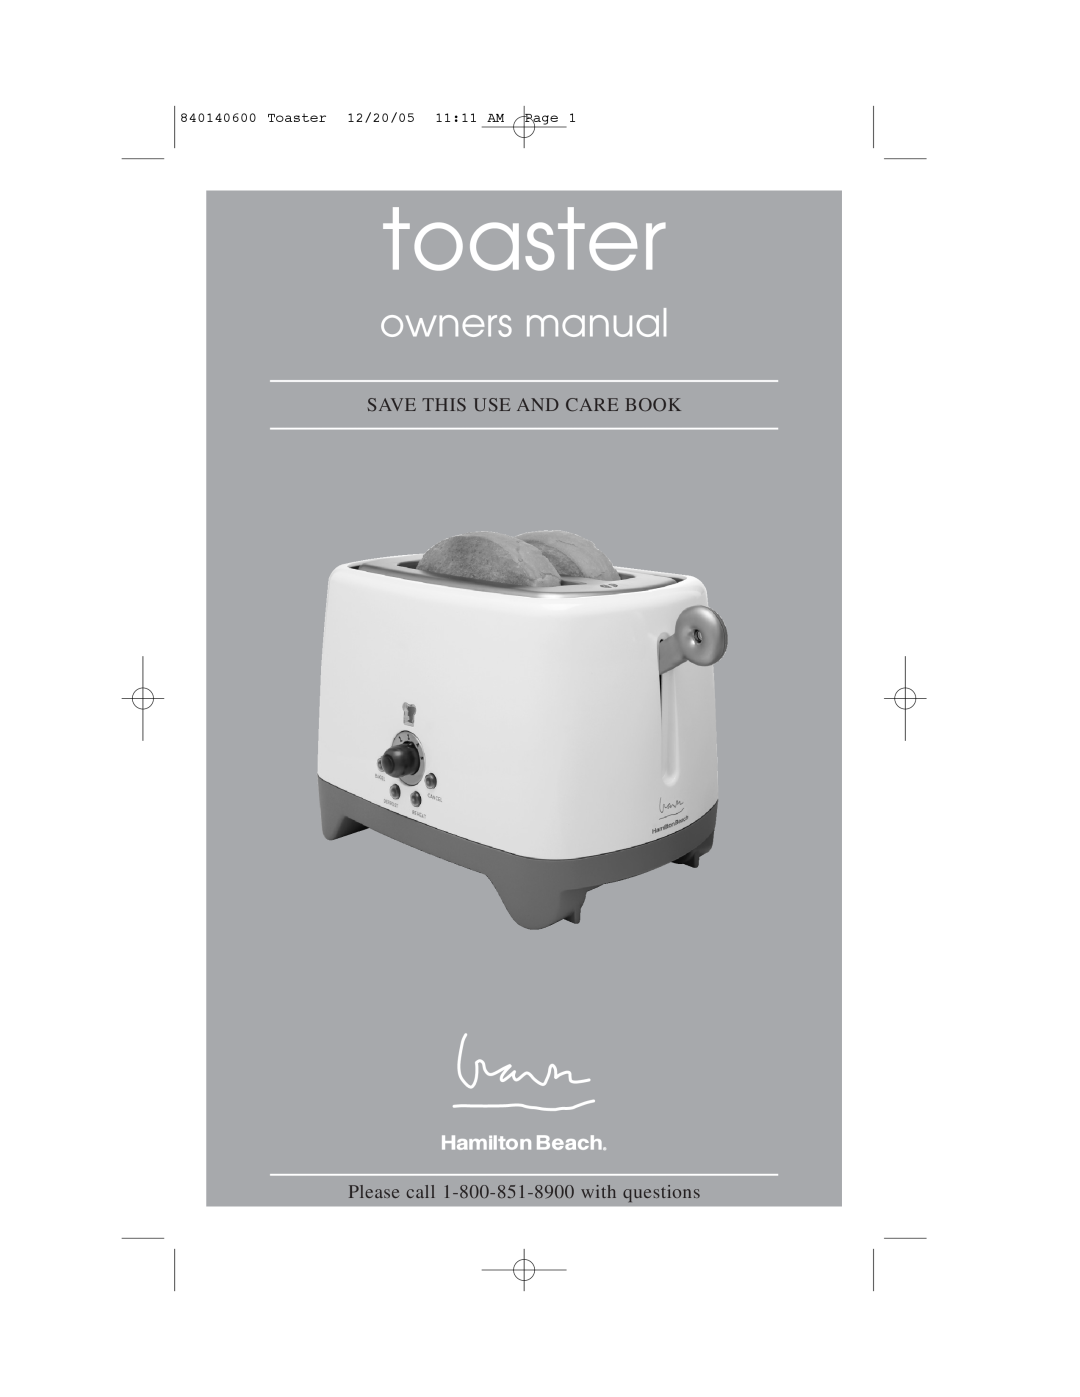 Hamilton Beach 22300 owner manual toaster, Save This Use And Care Book, Toaster 12/20/05 11 11 AM Page 